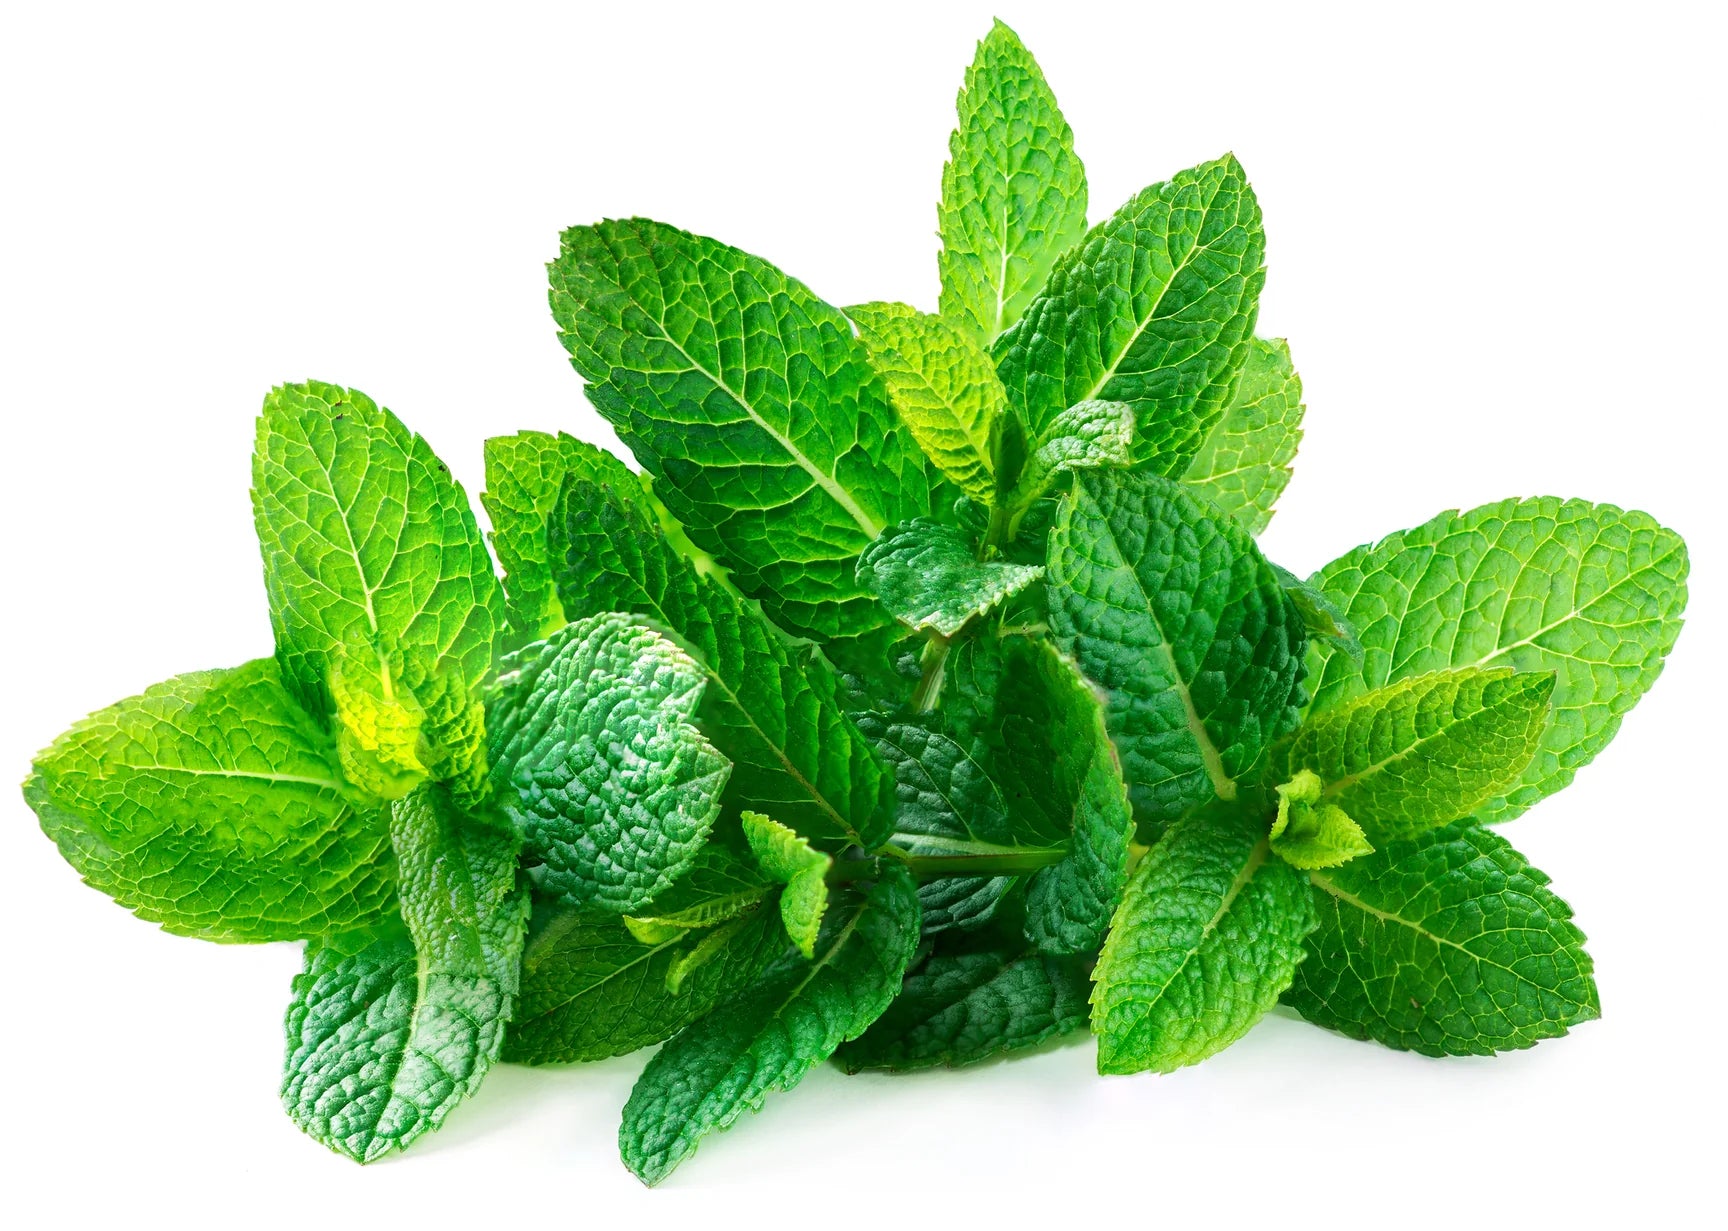 6 Uses For Peppermint Essential Oil